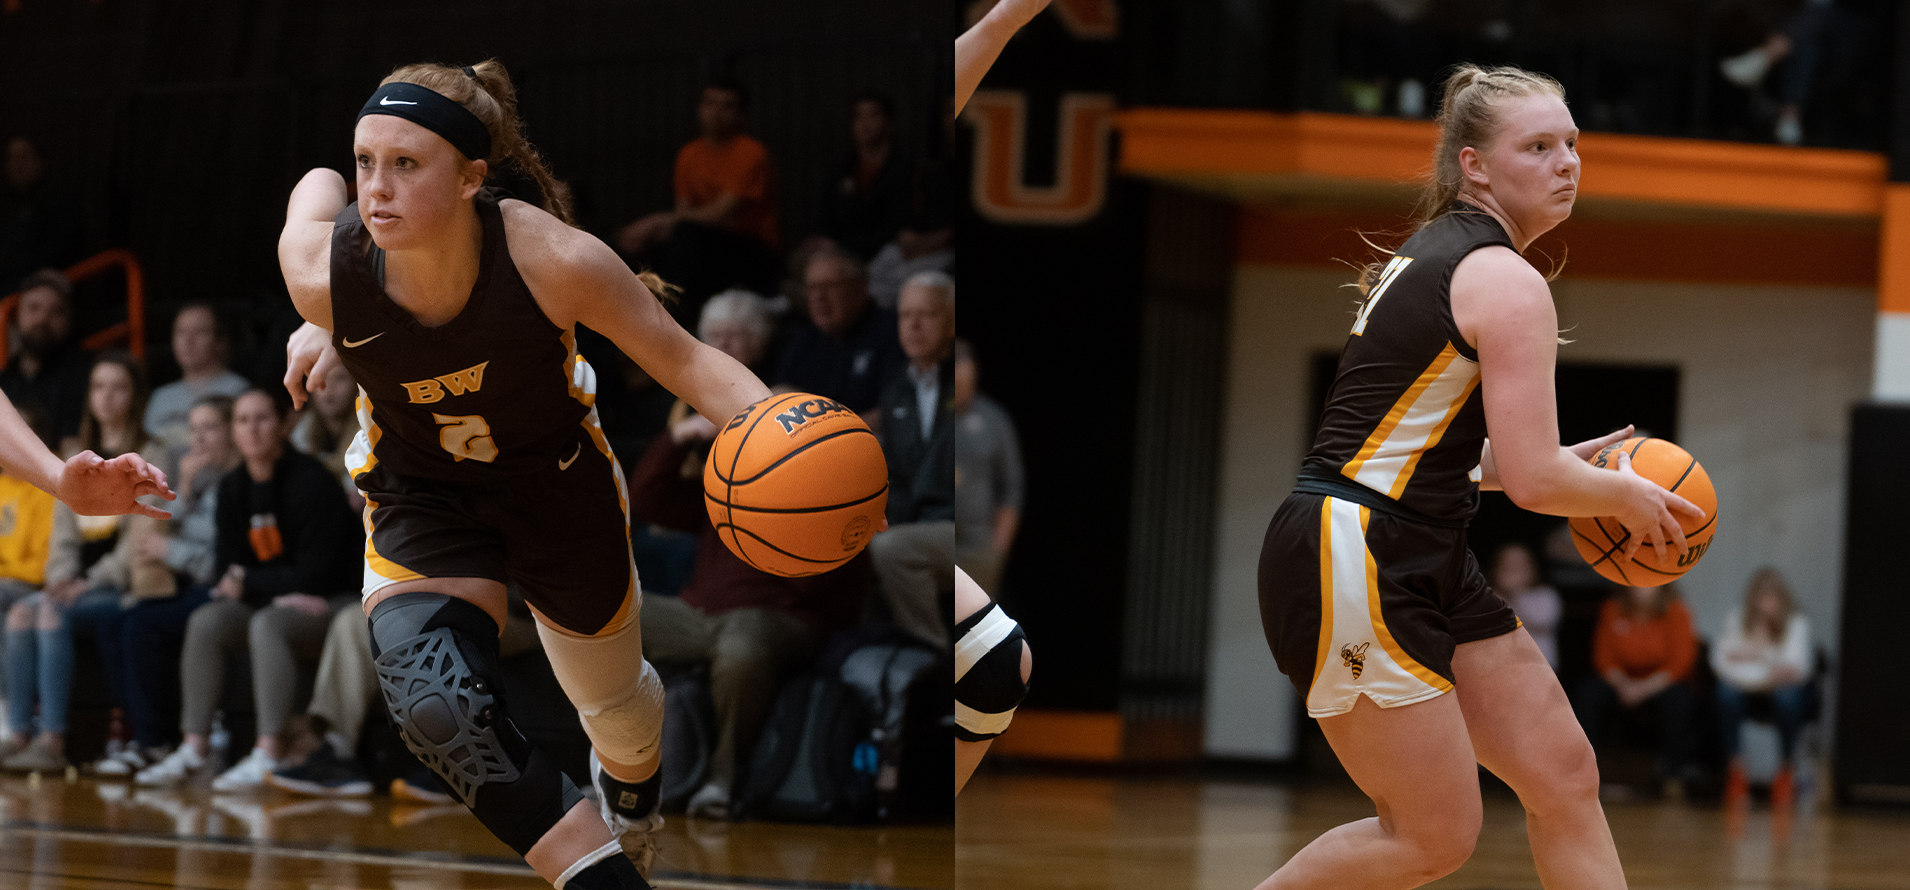 Emily Irwin, pictured left and Kaycie Badylak, pictured right (photos courtesy of Jackie Kasai '23